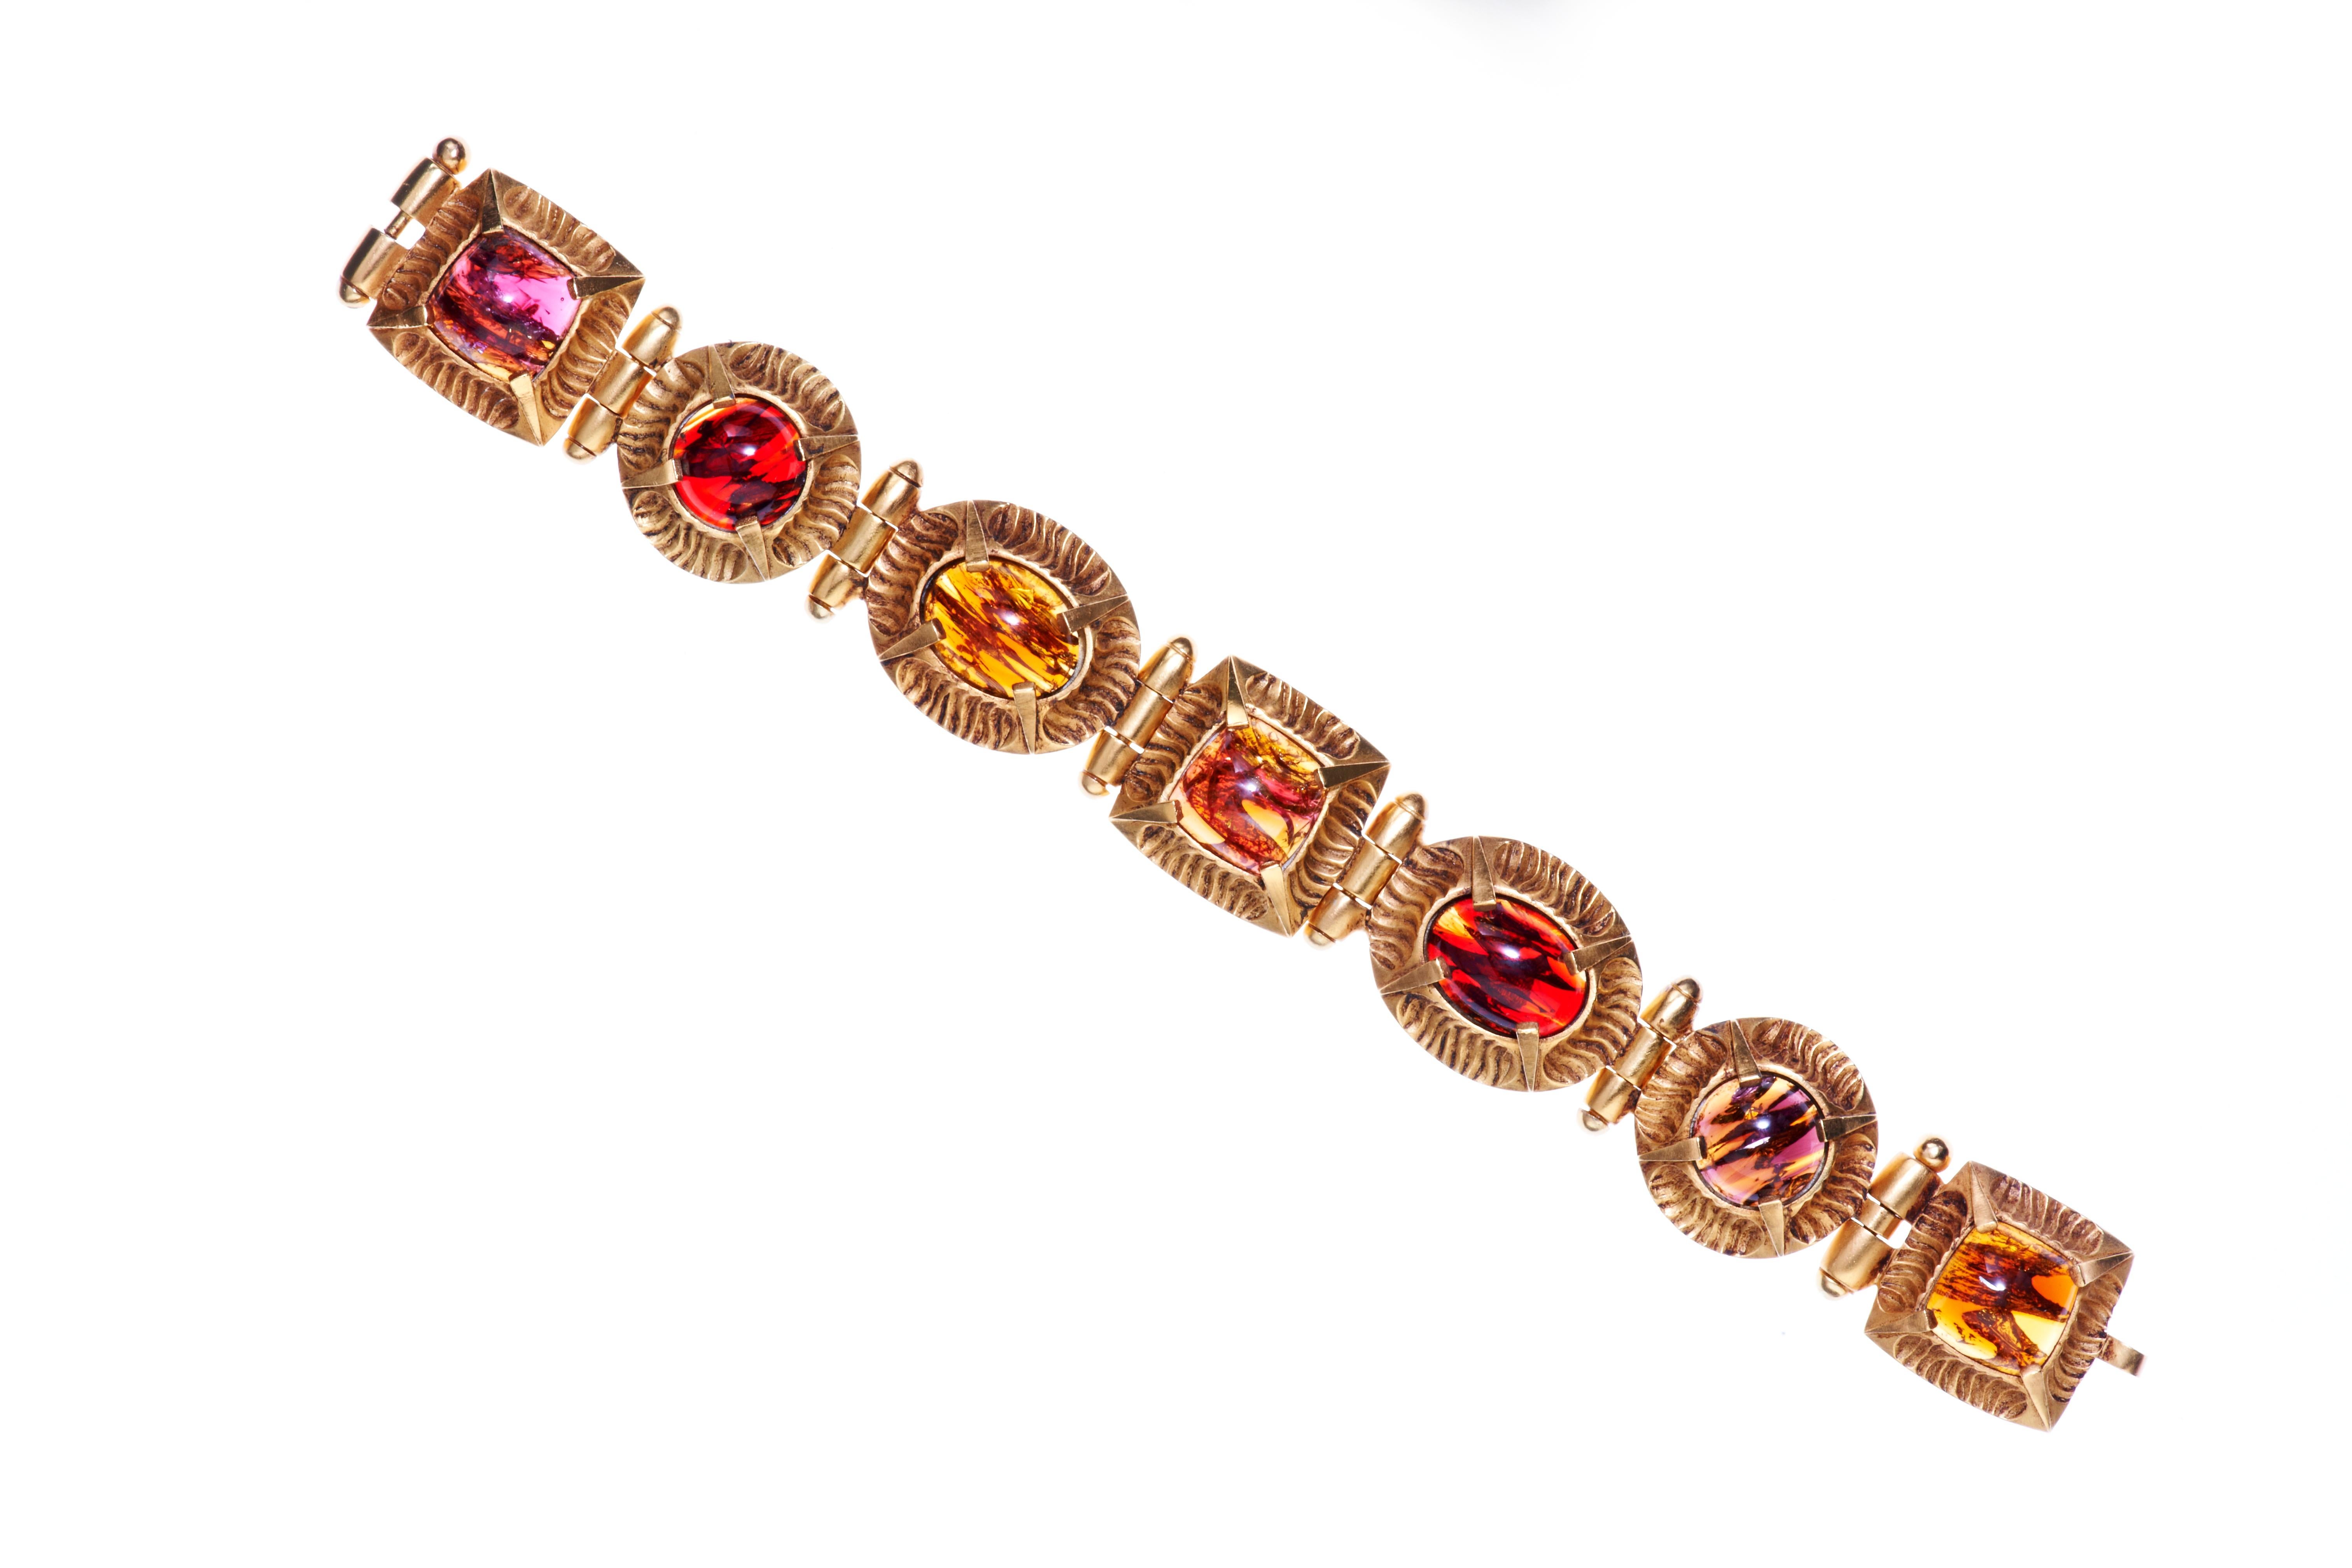 The beauty in the geometry highlights the exquisite handmade glass cabochons that drape around the wrist perfectly.  The bracelet is finished with 24 carat gold with cabochons in ruby and amber or rhodium with aqua blue, emerald and royal blue. An